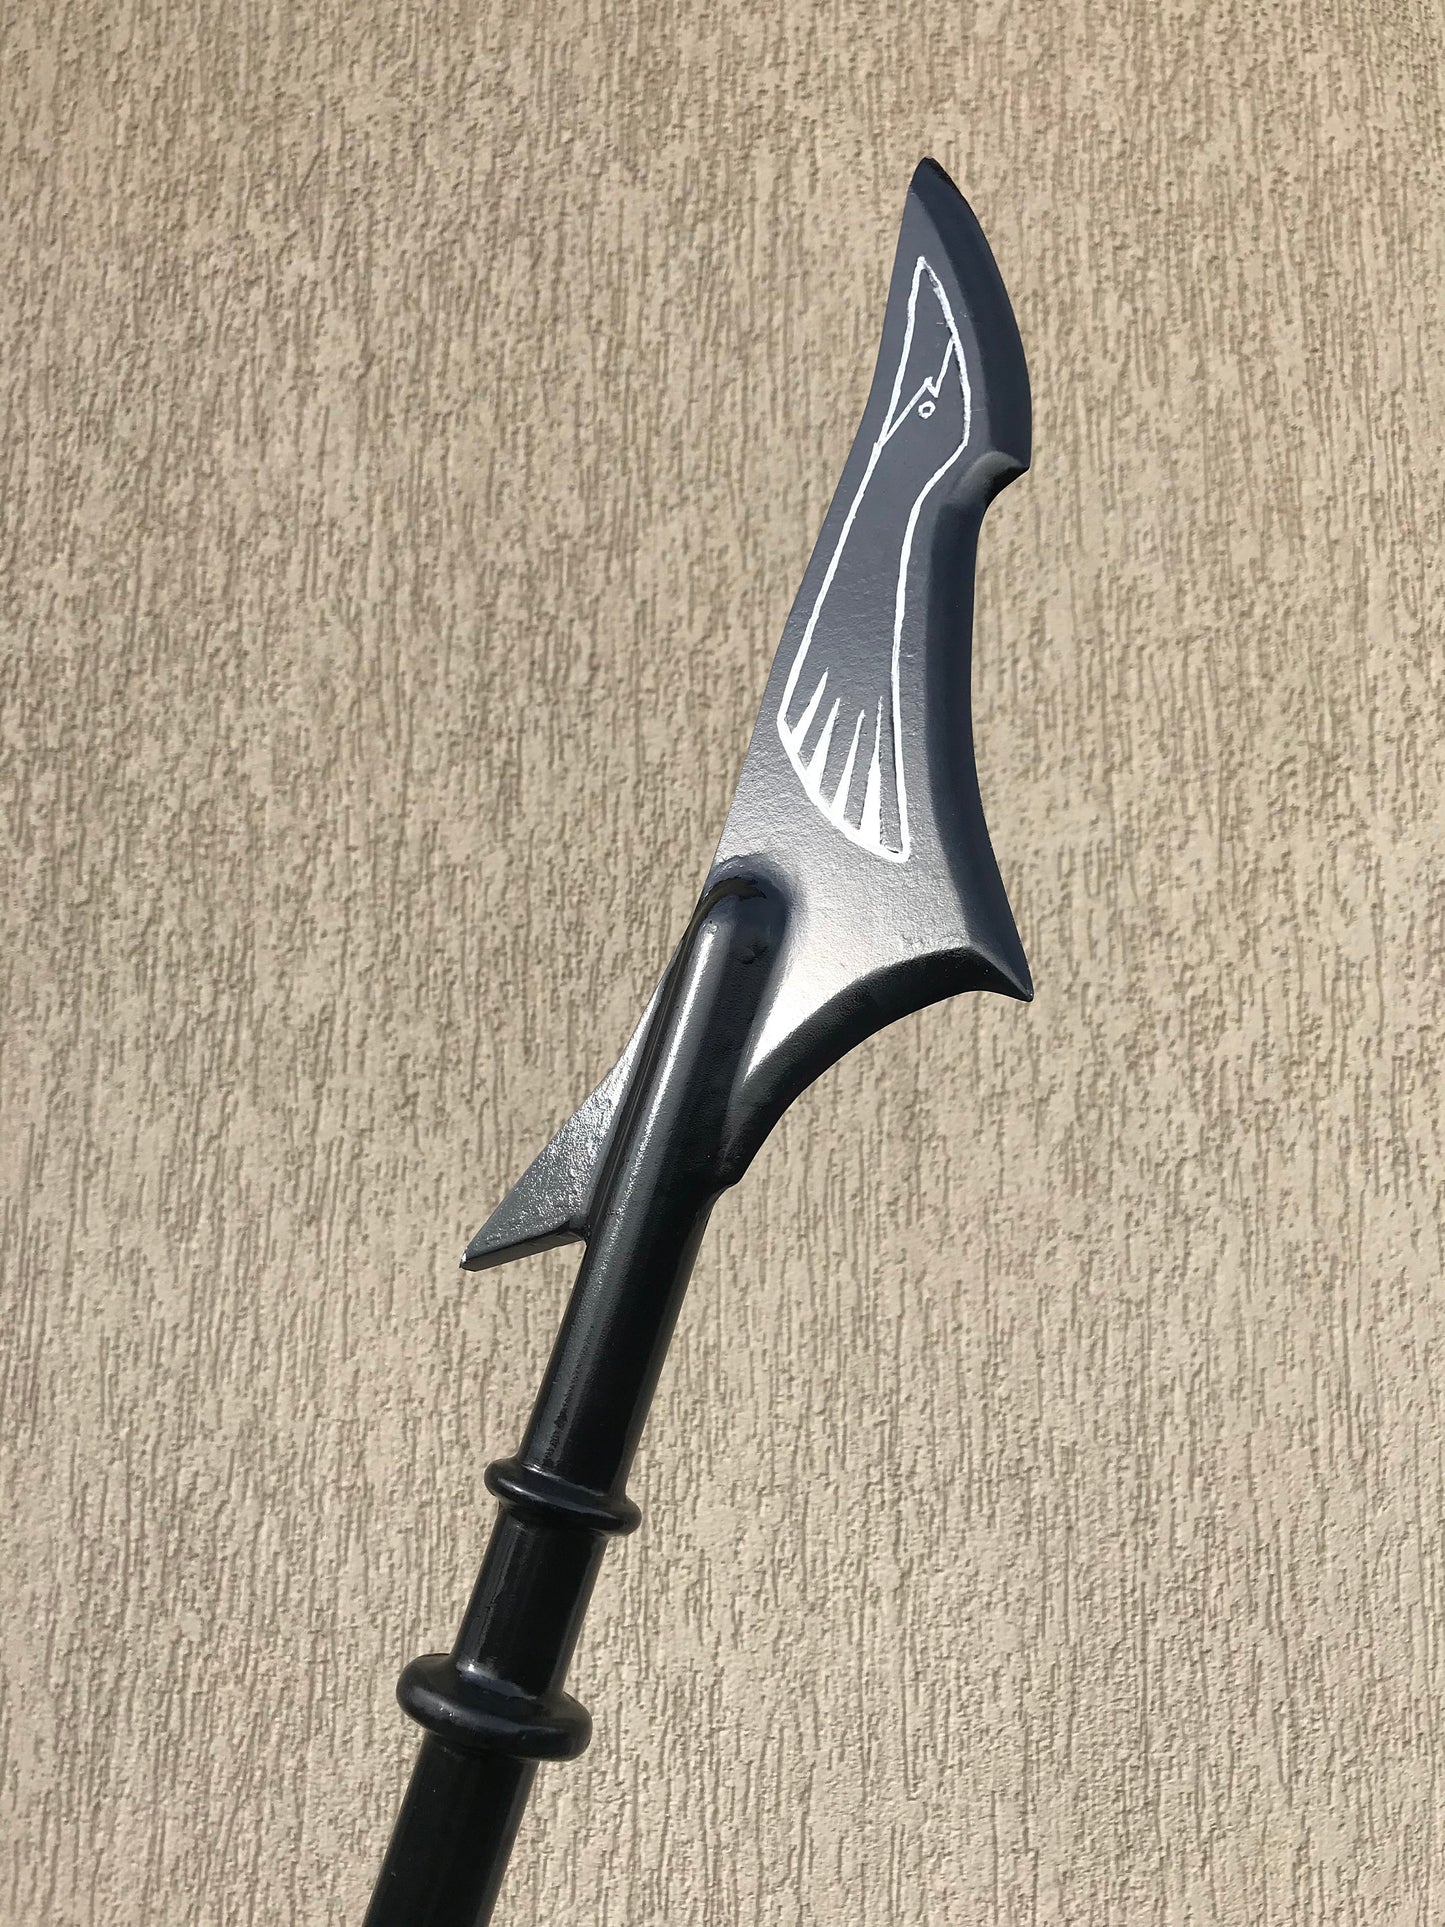 Stave, Mat Cauthon, Wheel of Time, spear, Perrin, WoT, epic, Rand, fantasy, Mat, cosplay, cosplay armor, cosplay weapon, magic, viking spear